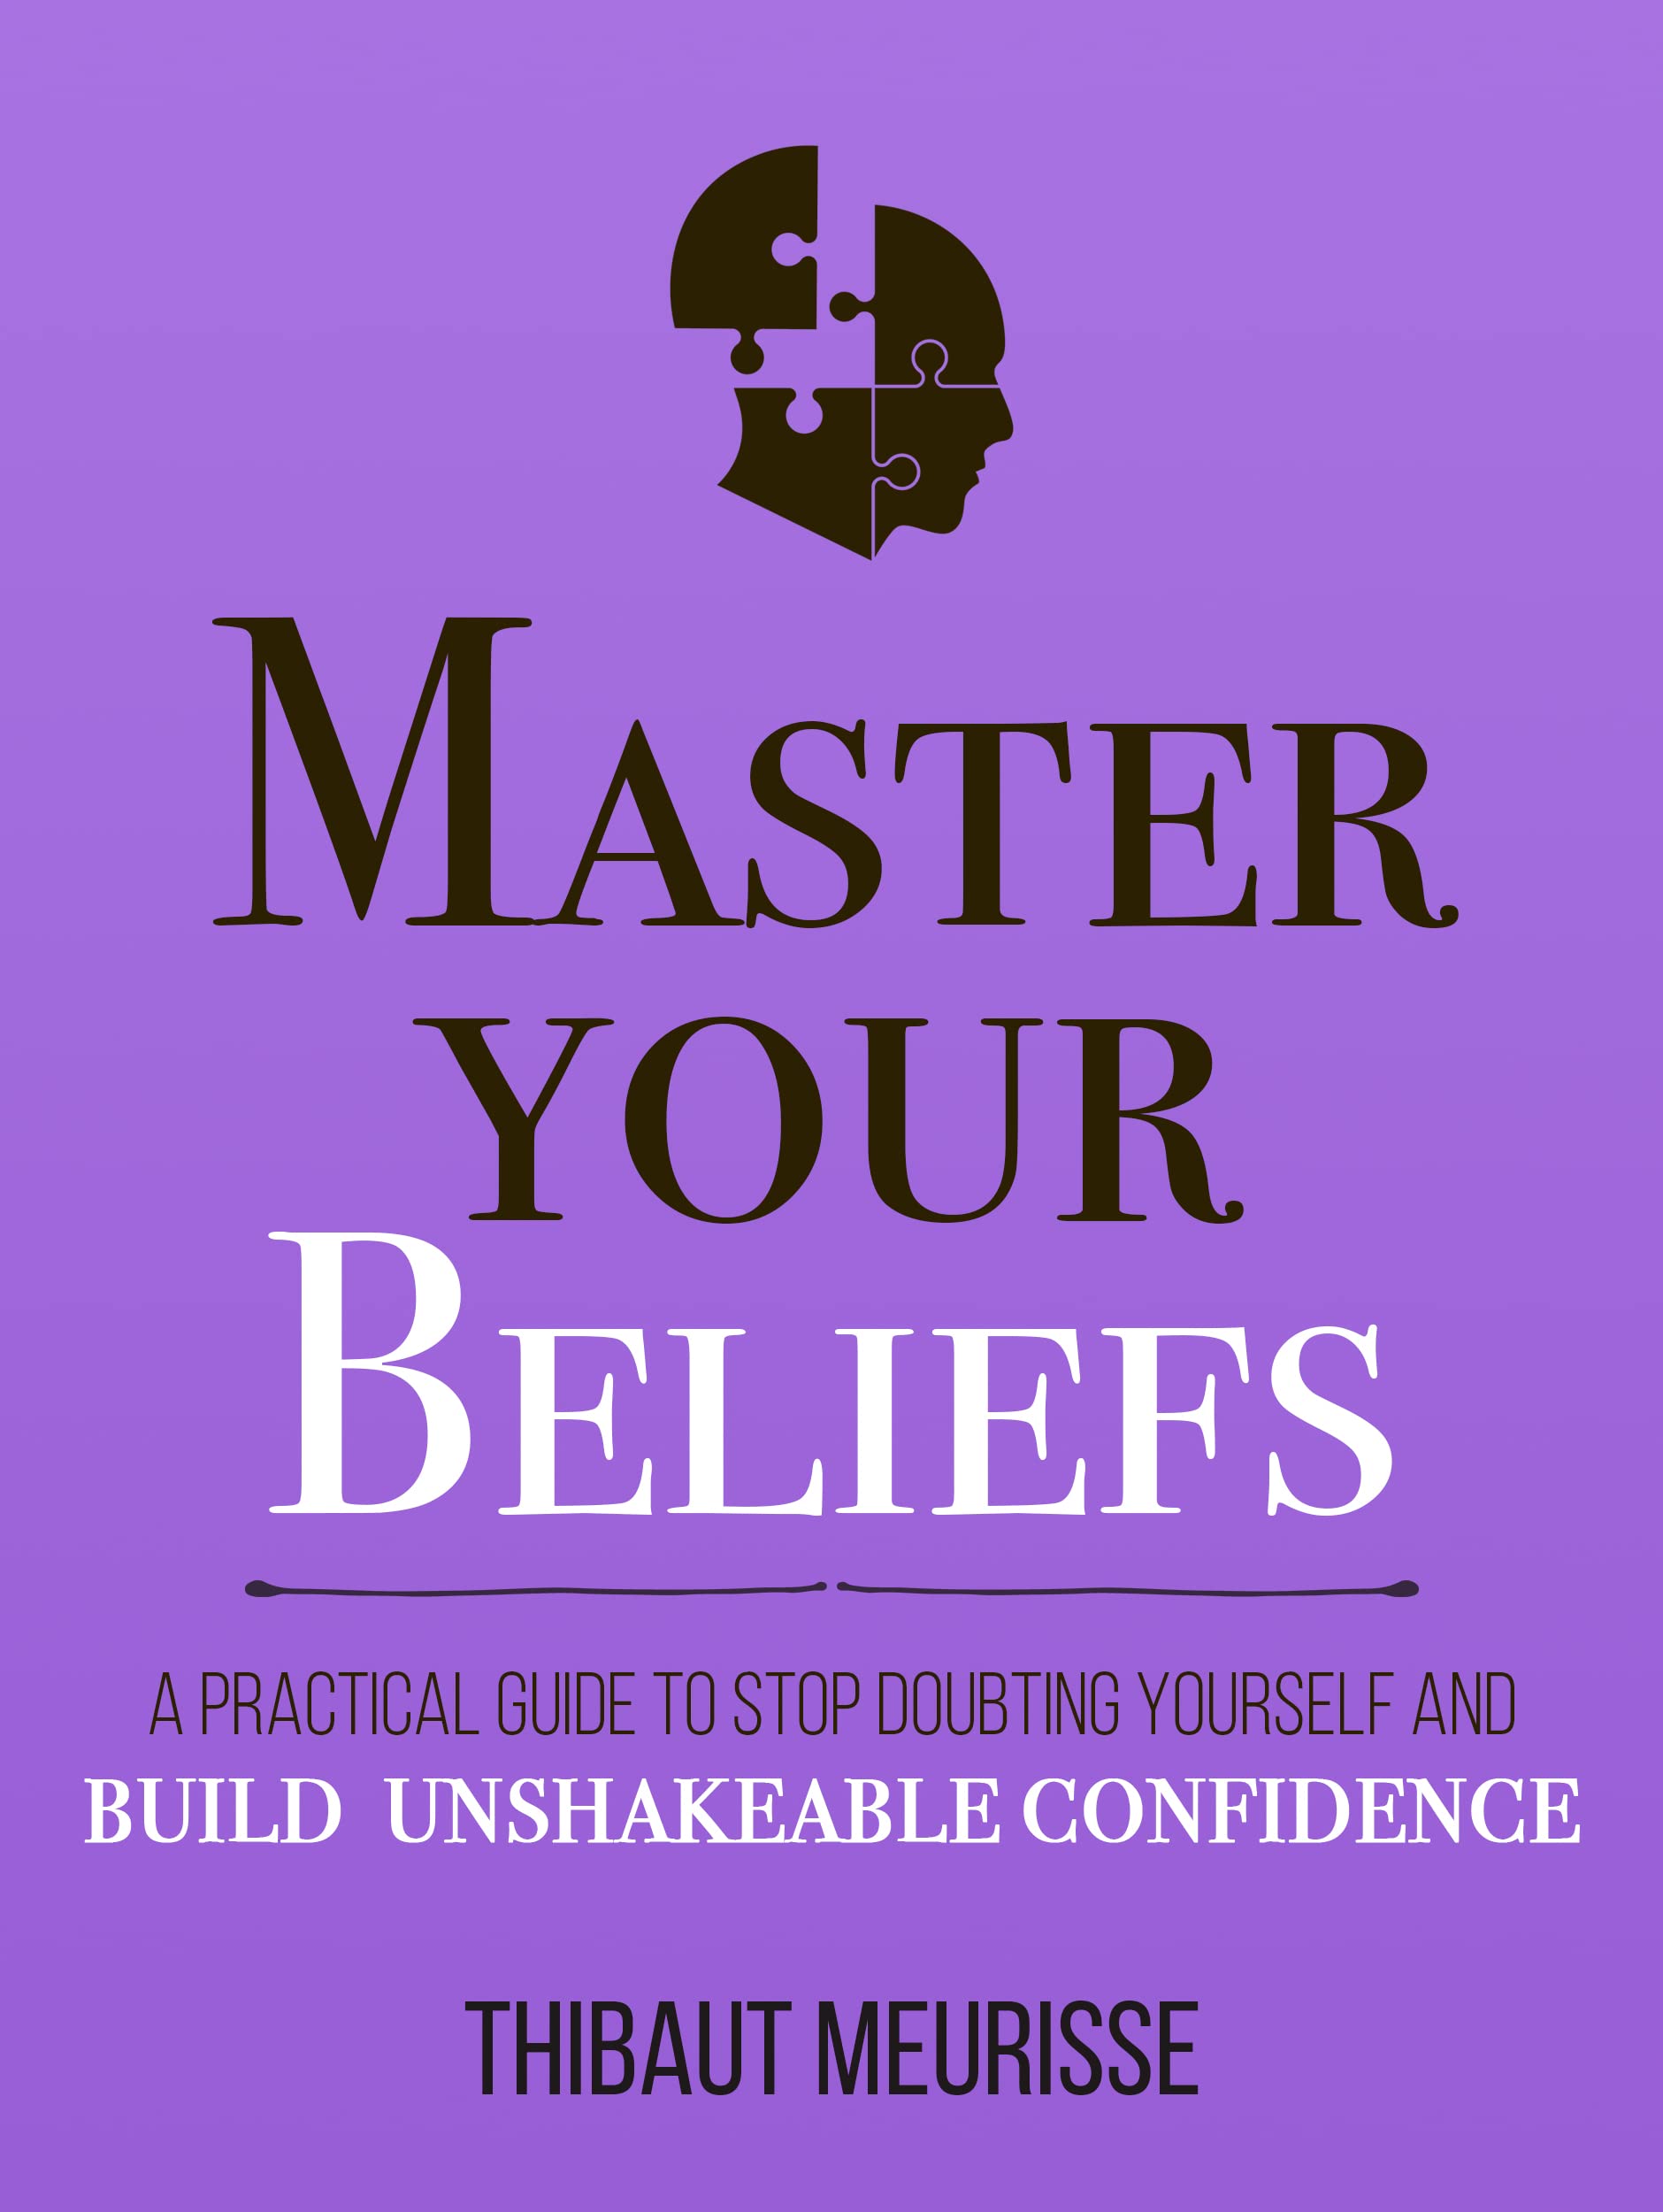 Master Your Beliefs : A Practical Guide to Stop Doubting Yourself and Build Unshakeable Confidence (Mastery Series Book 7)